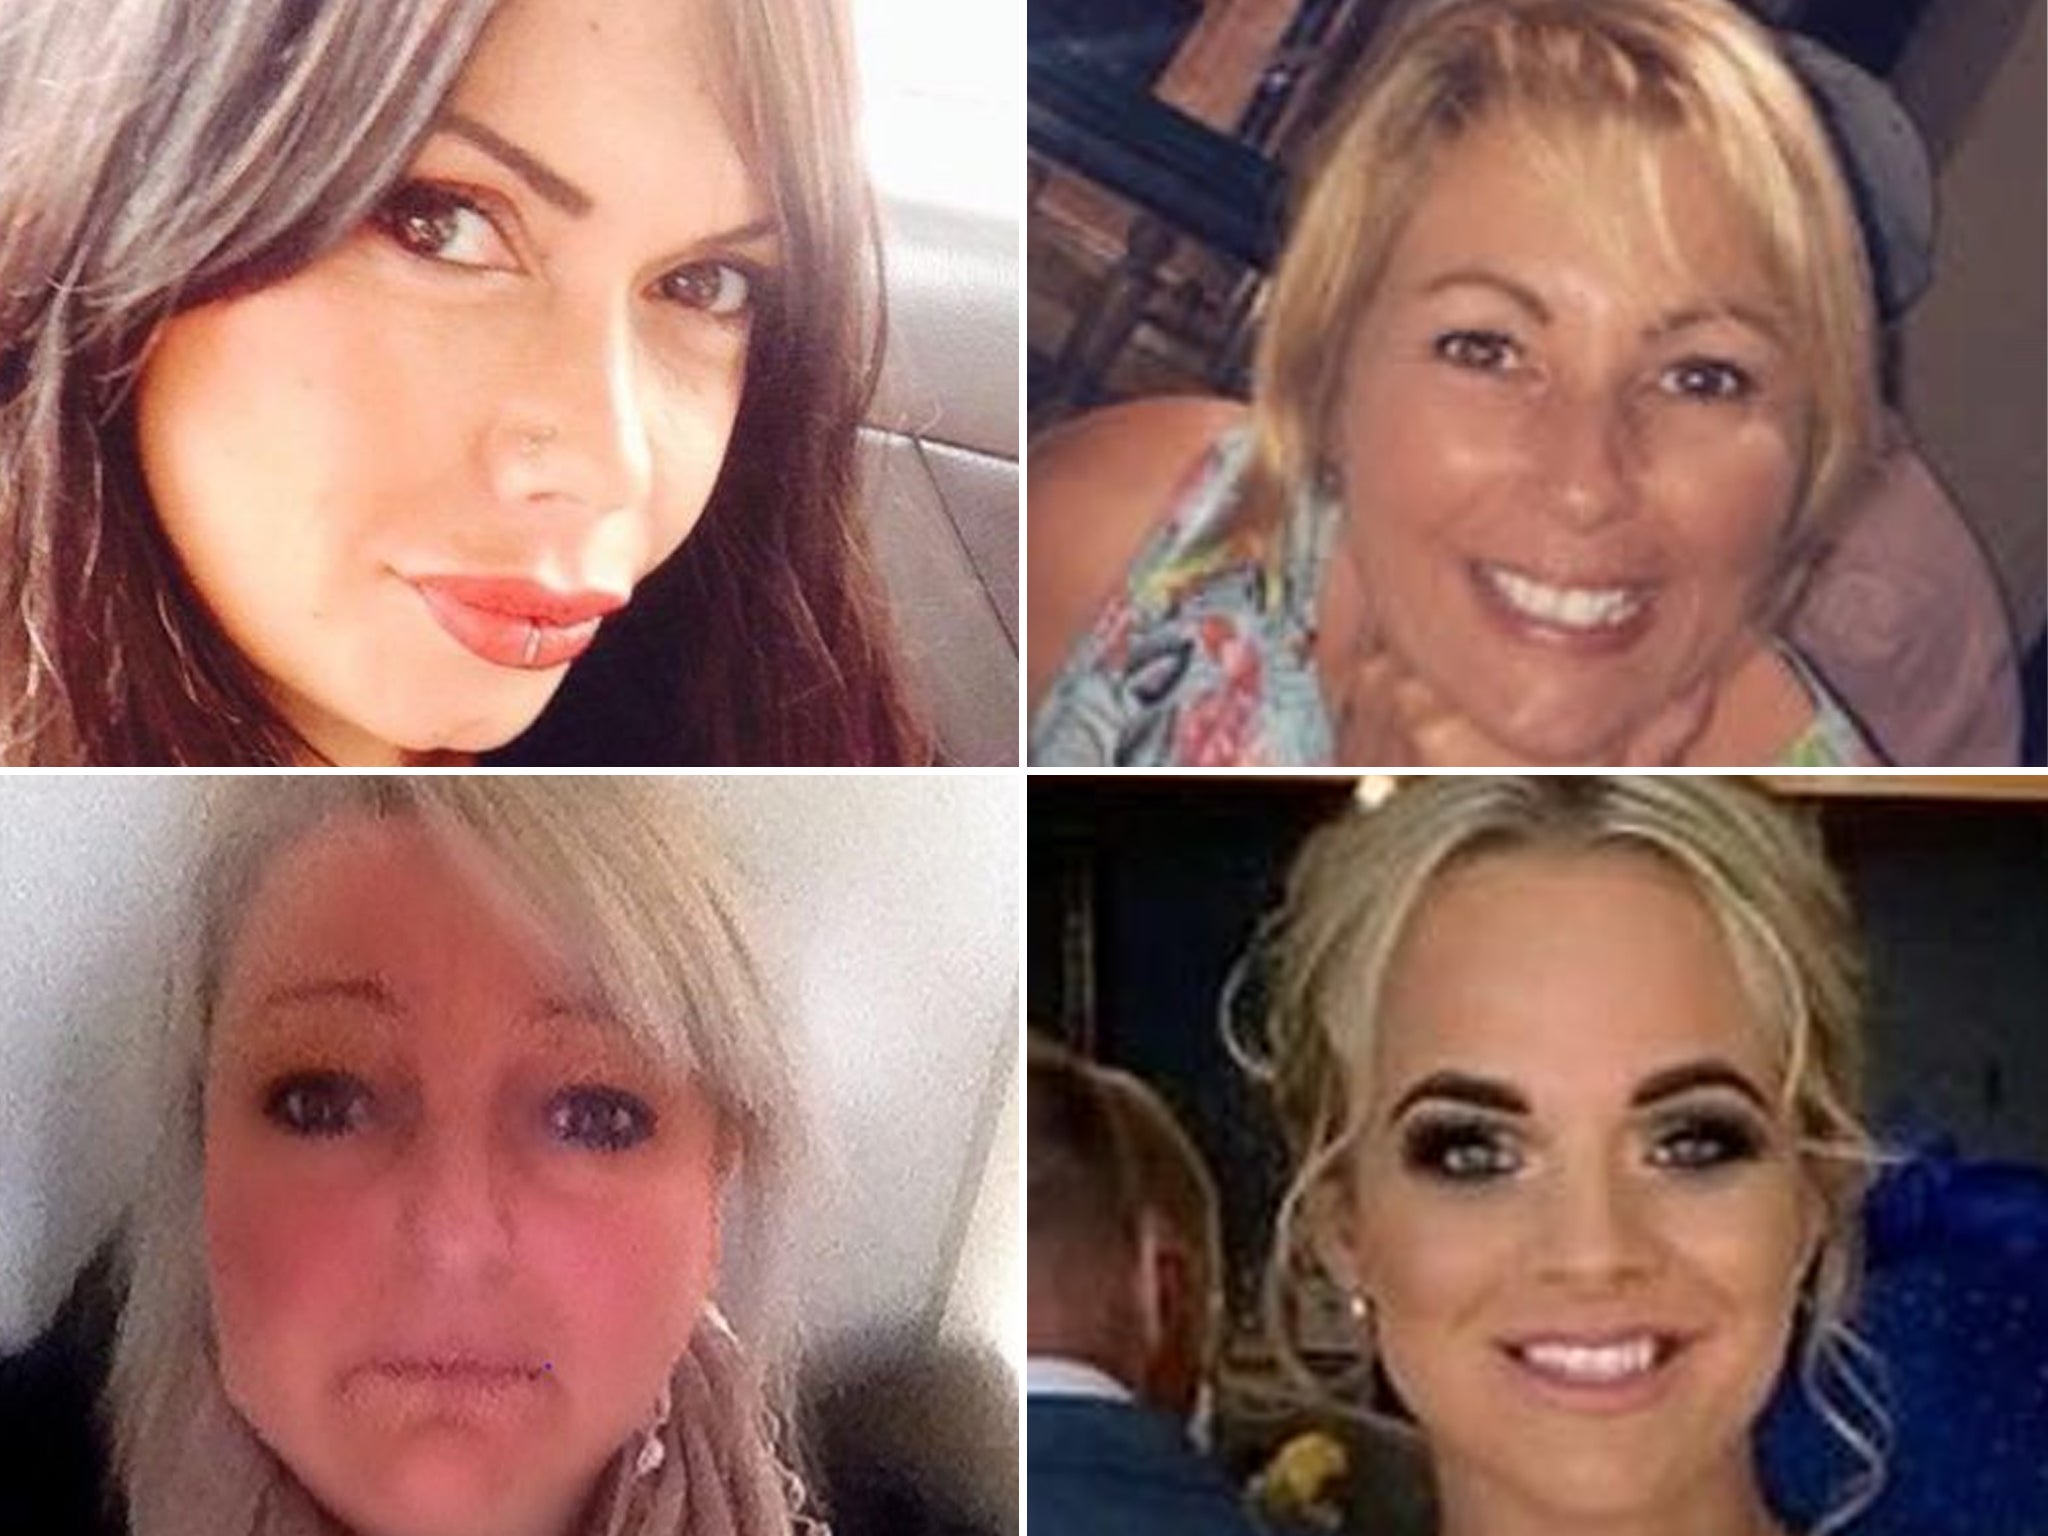 Pictured, clockwise from top left, are women found dead: Claire Anderson, Amanda Sedgwick, Amy Stringfellow, Michelle Morris